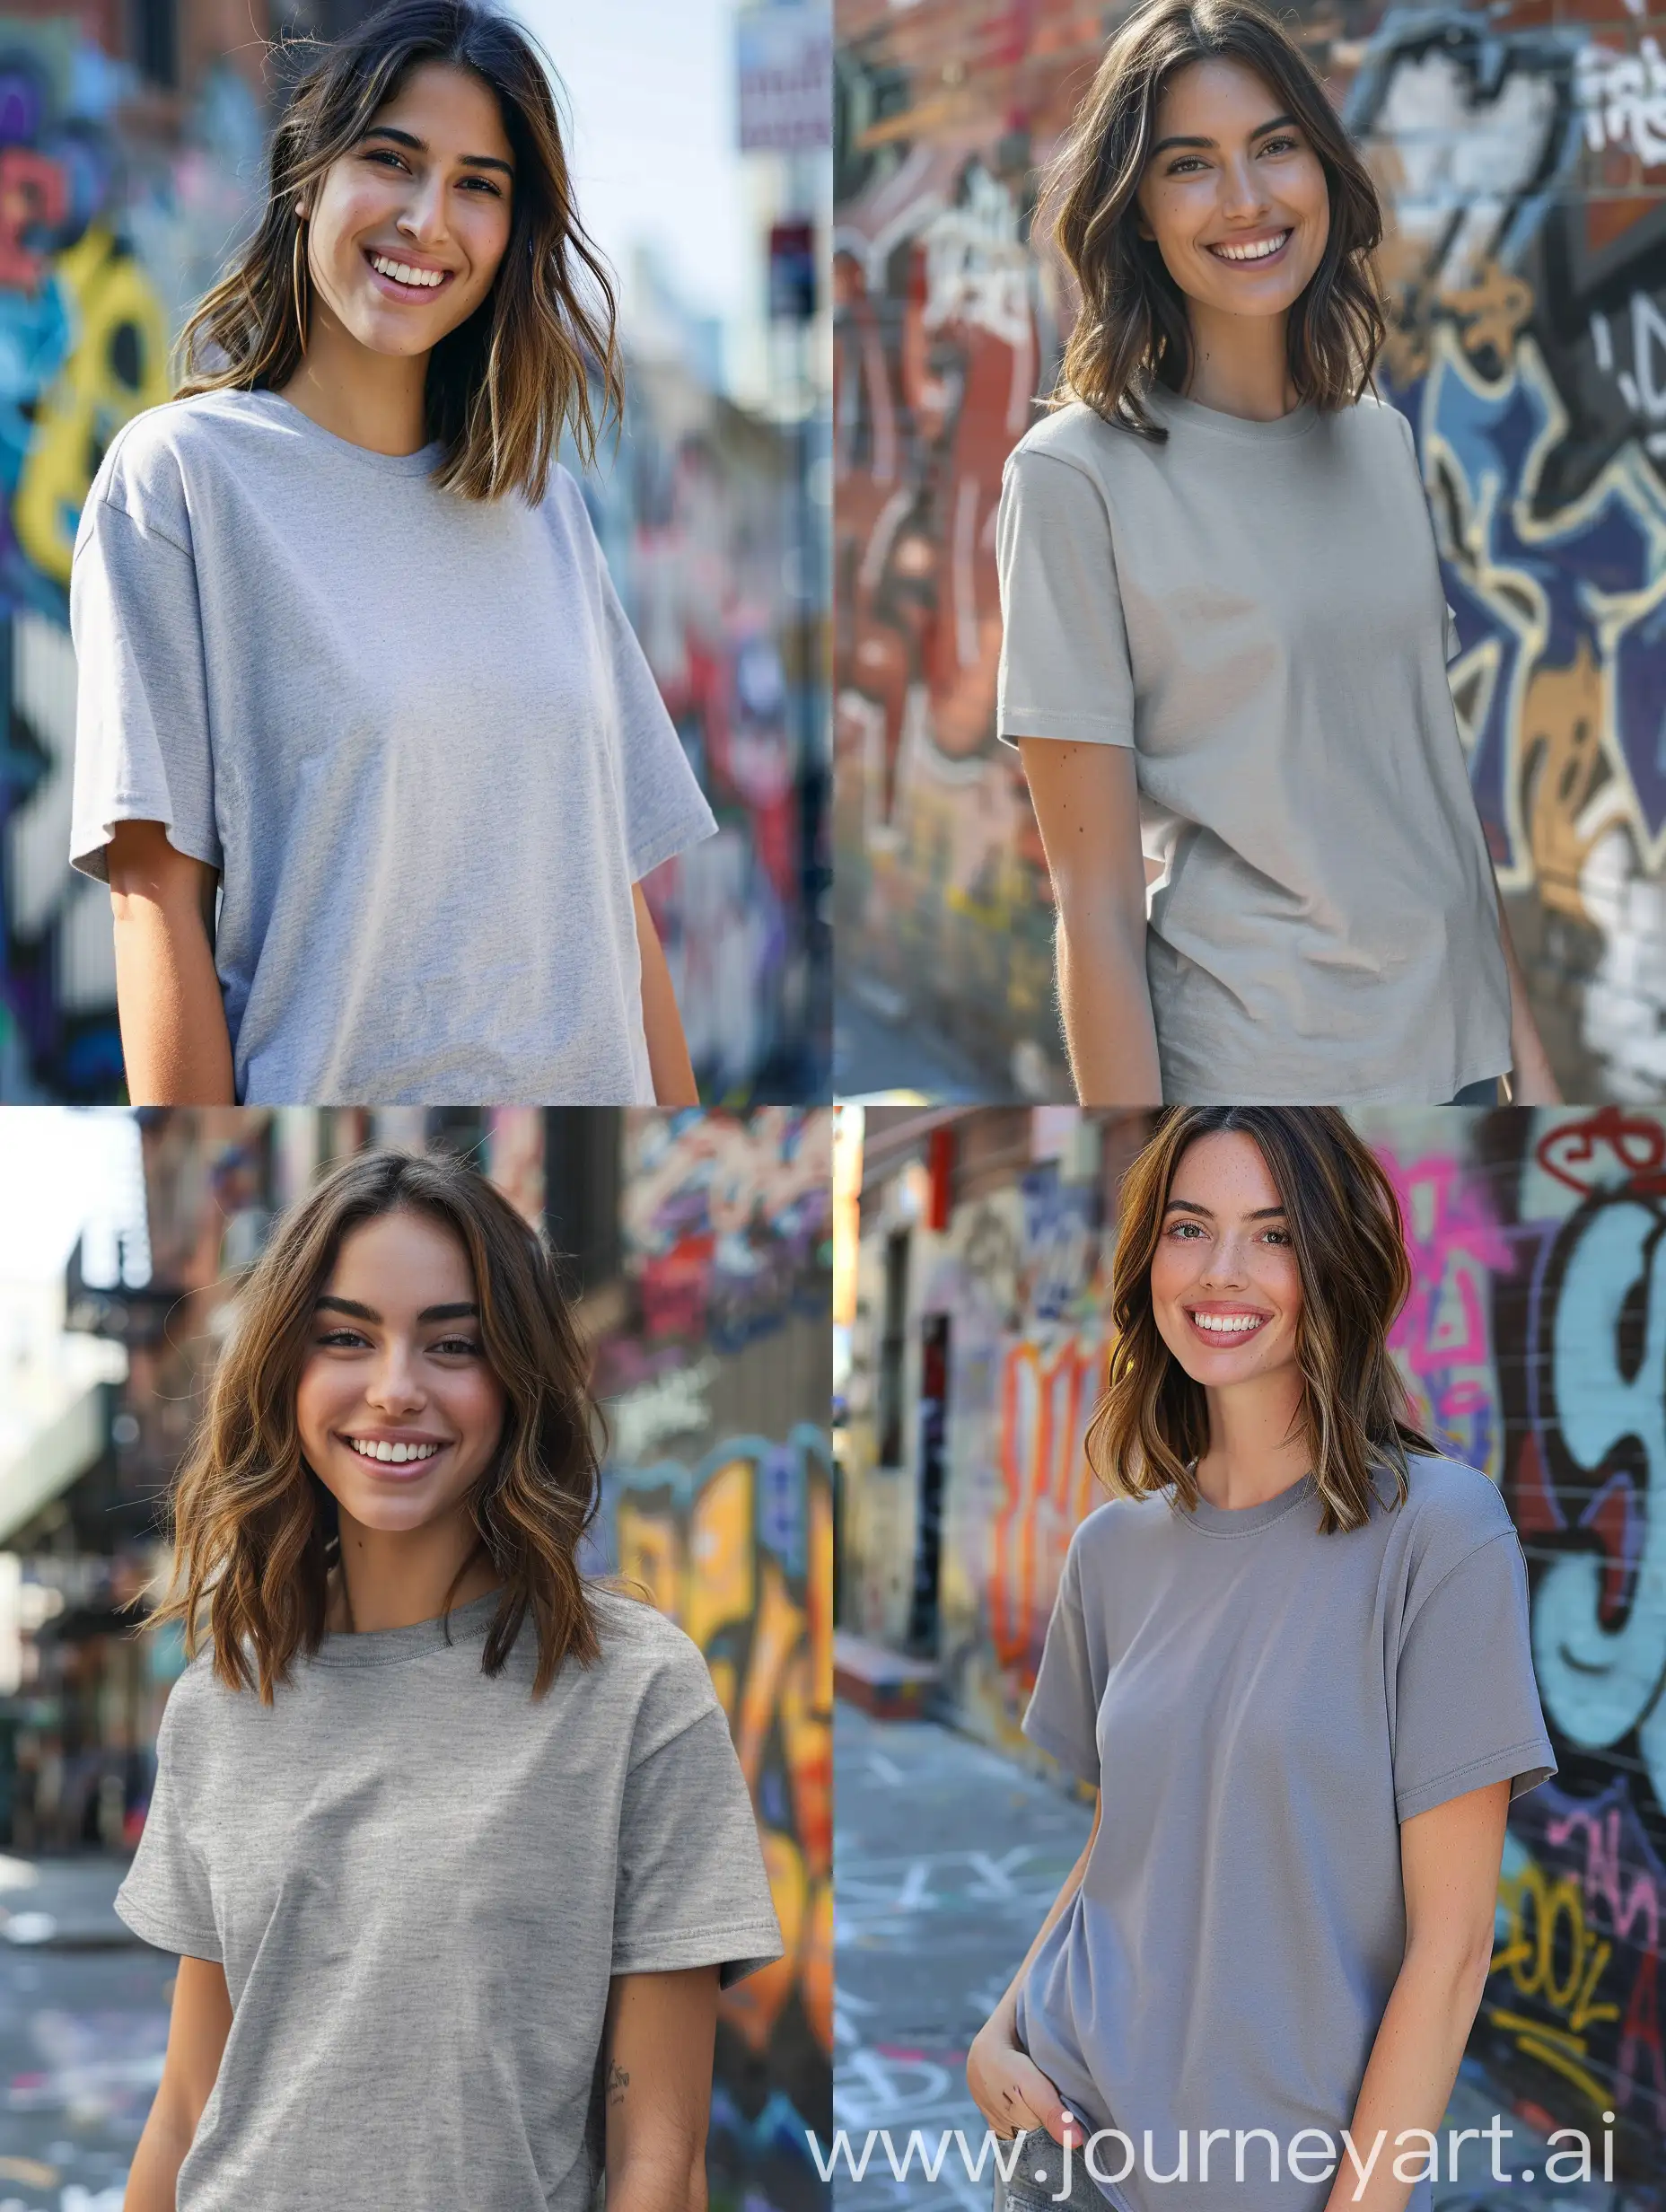 Smiling-Woman-in-Bella-Canvas-TShirt-with-Bowery-Wall-Graffiti-Background